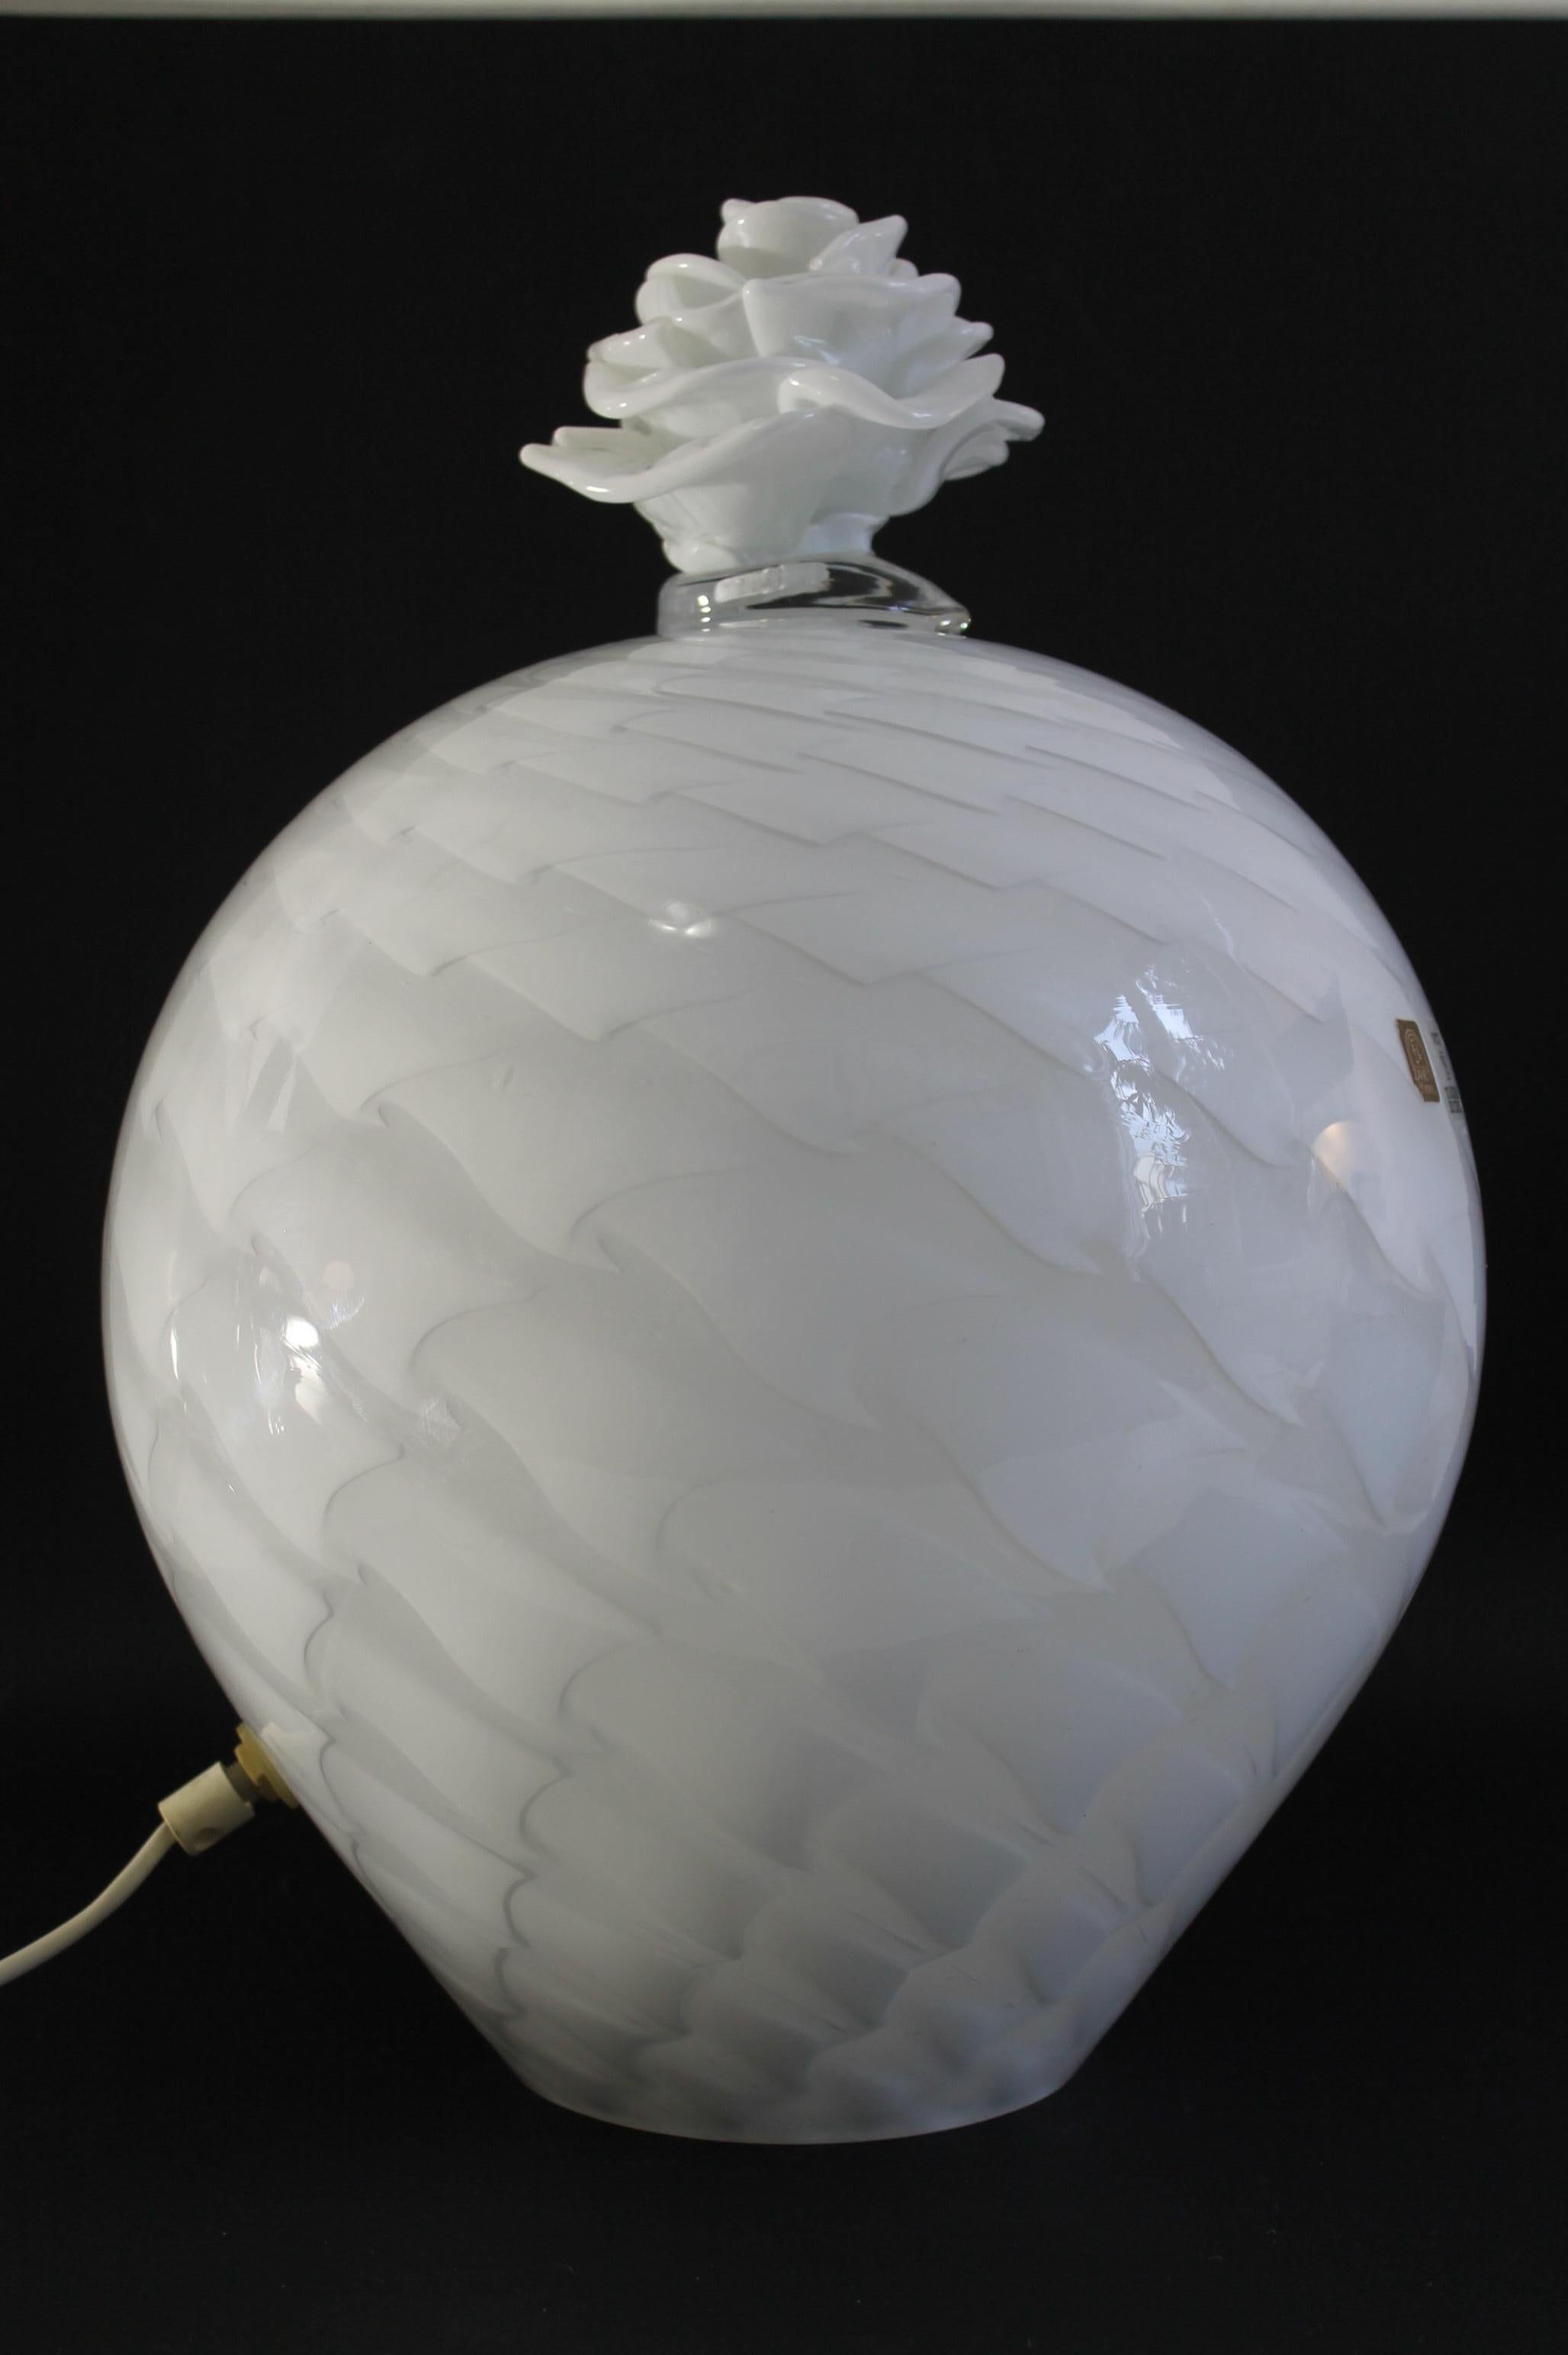 Rare, unique piece of art in form of a glass lamp form and spotless!! 

An original master piece from one of the greatest contemporary Murano glassmakers
Large Murano: Zanetti Vetreria by Licio Zanetti - Italy

Still with the original 1960's